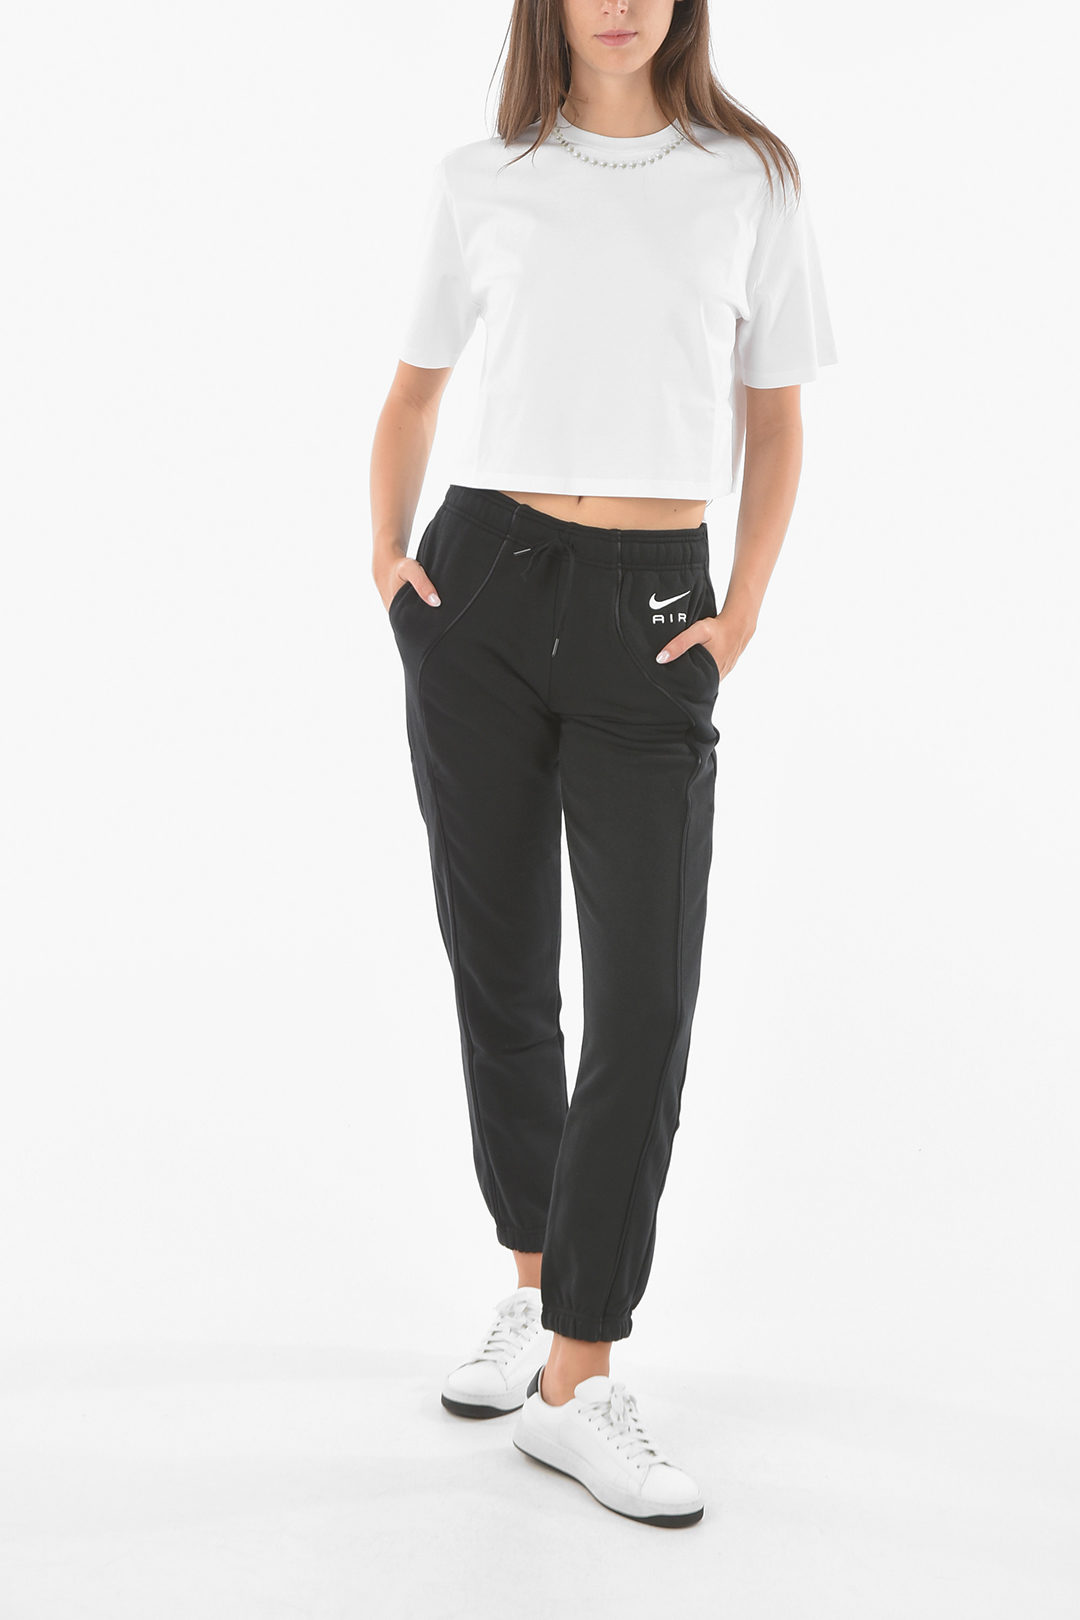 Nike Mid Rise Standar Fit Joggers women - Glamood Outlet